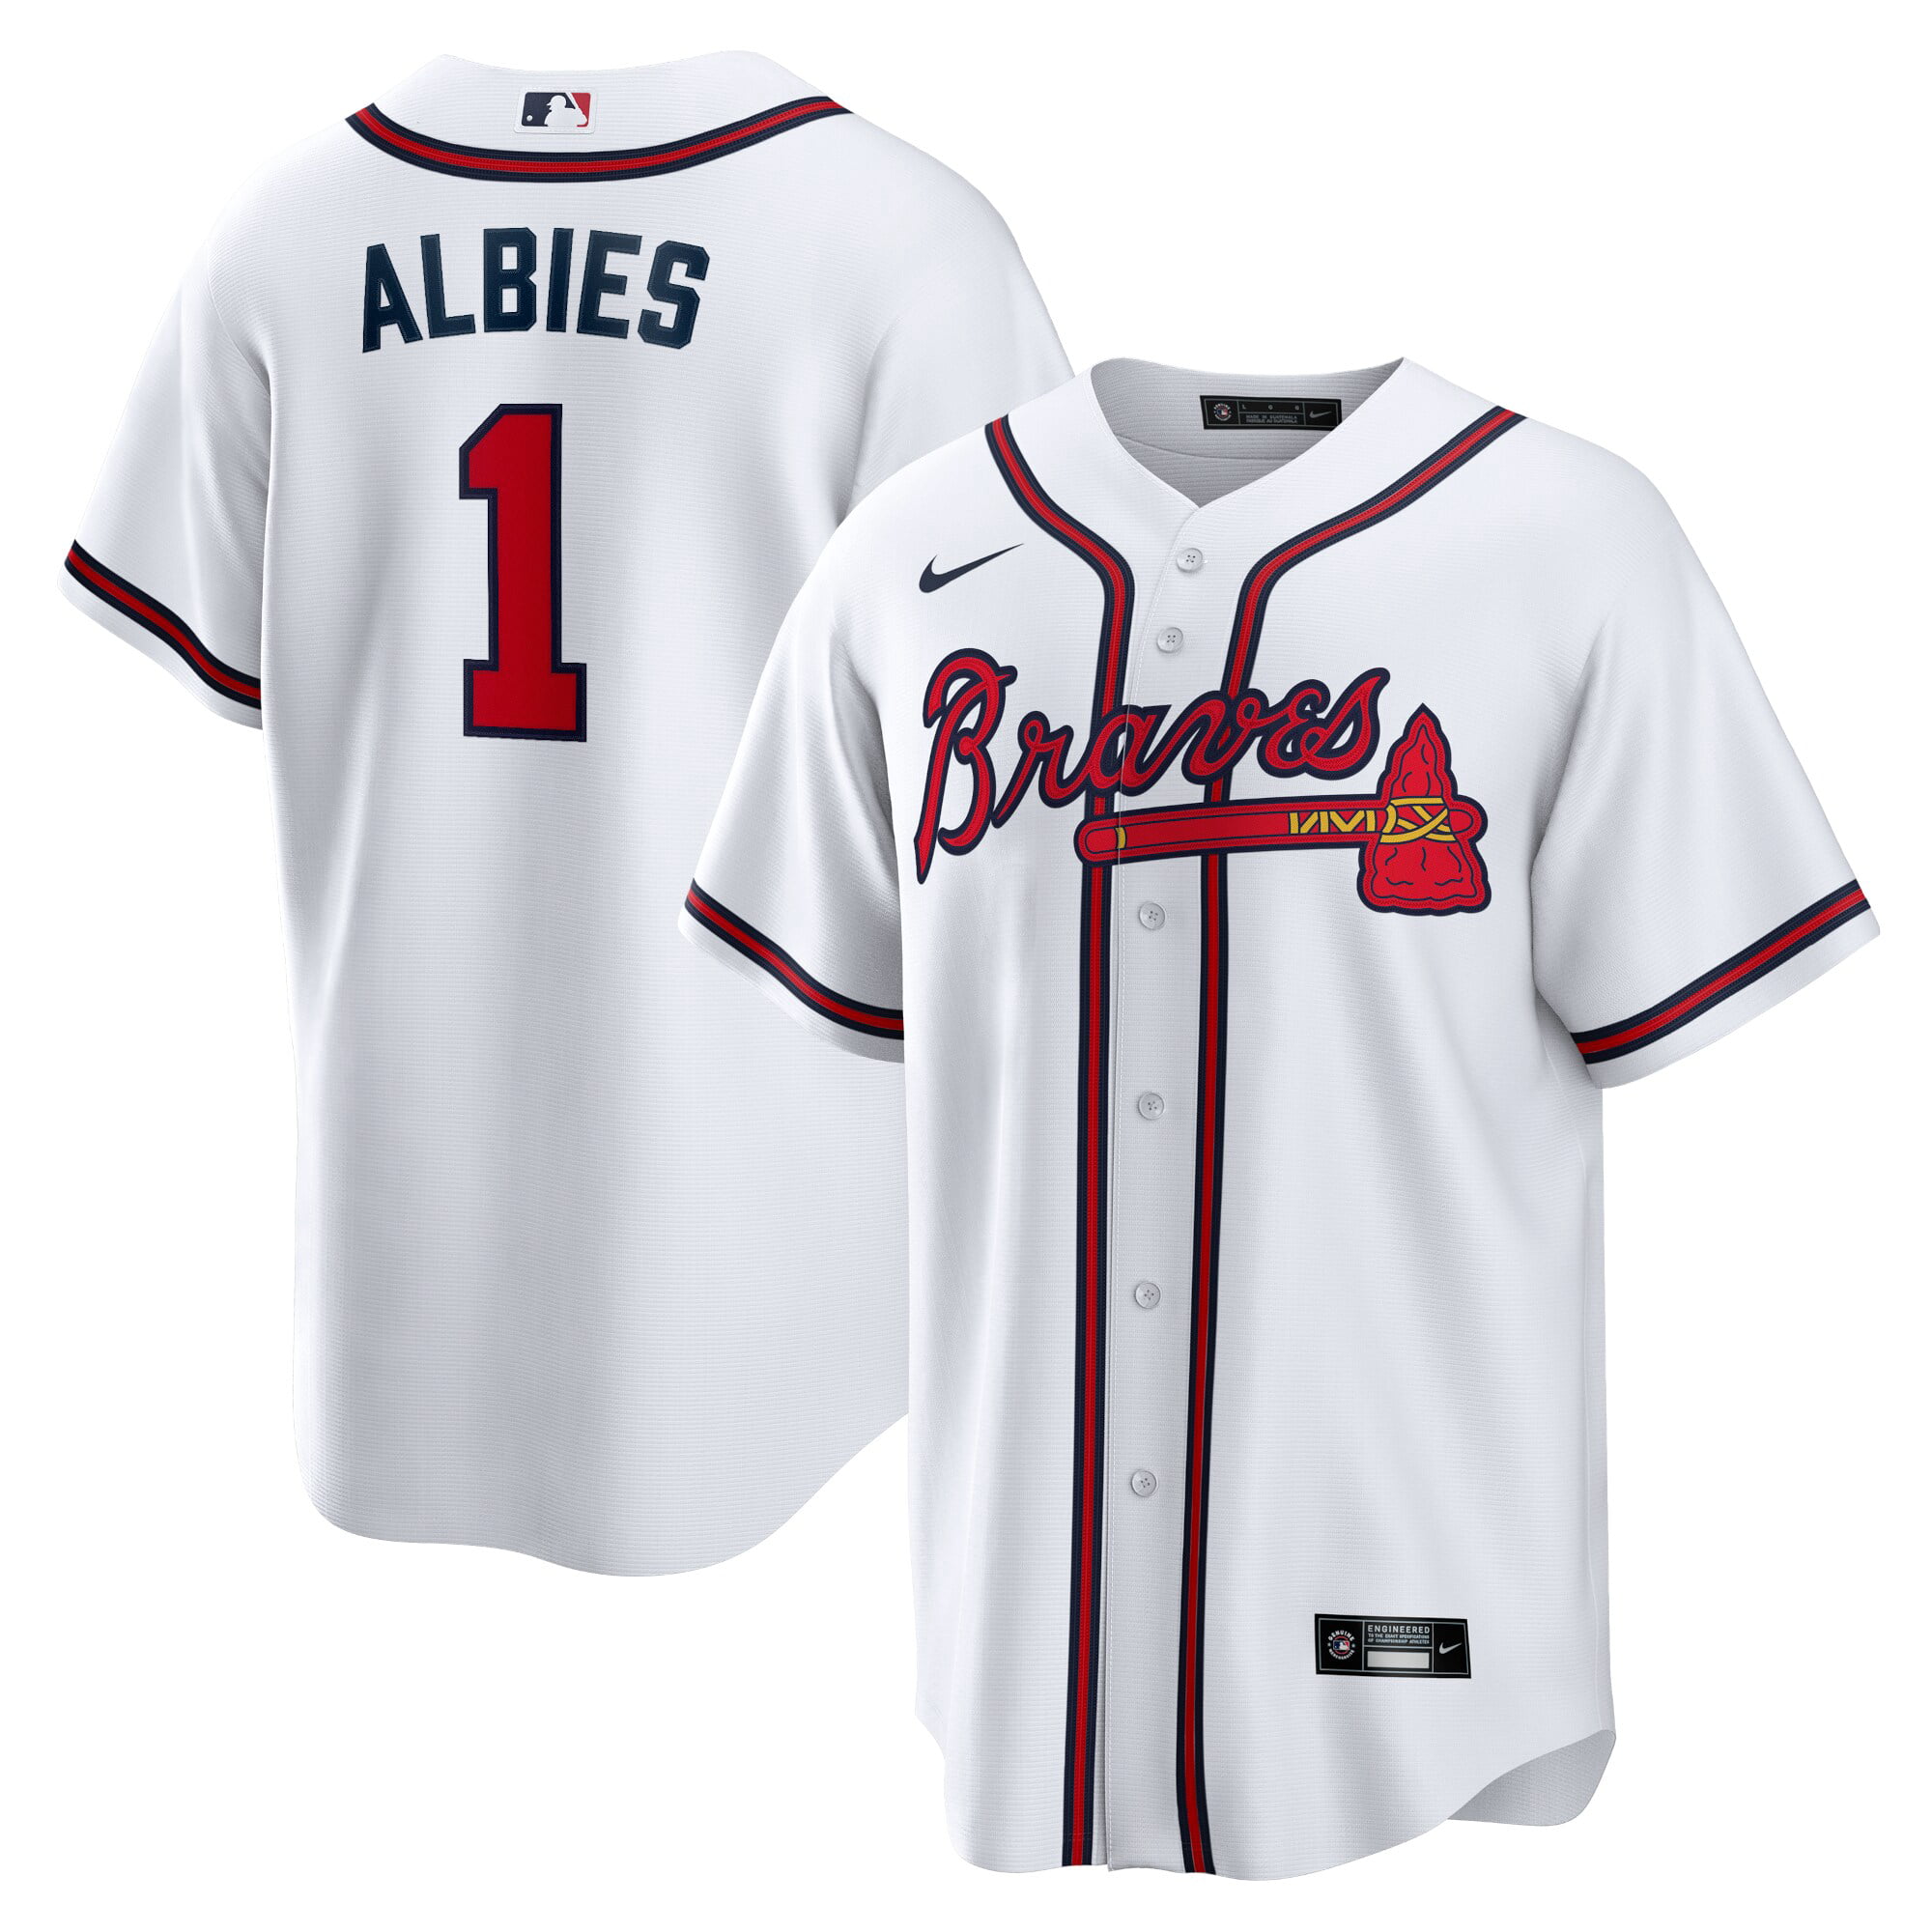 albies youth jersey